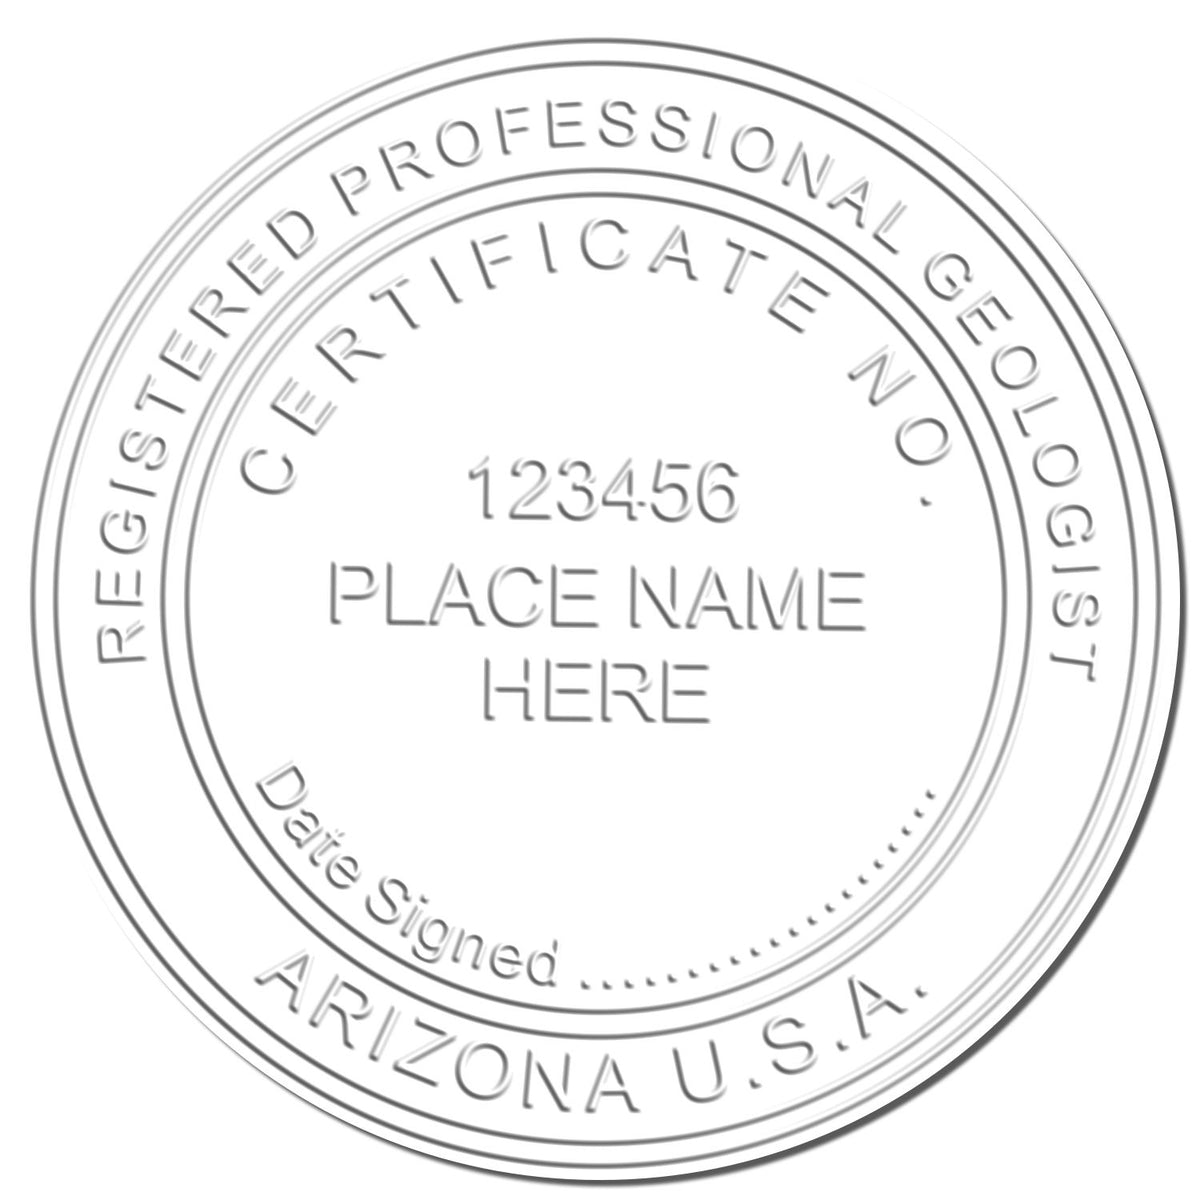 A photograph of the State of Arizona Extended Long Reach Geologist Seal stamp impression reveals a vivid, professional image of the on paper.